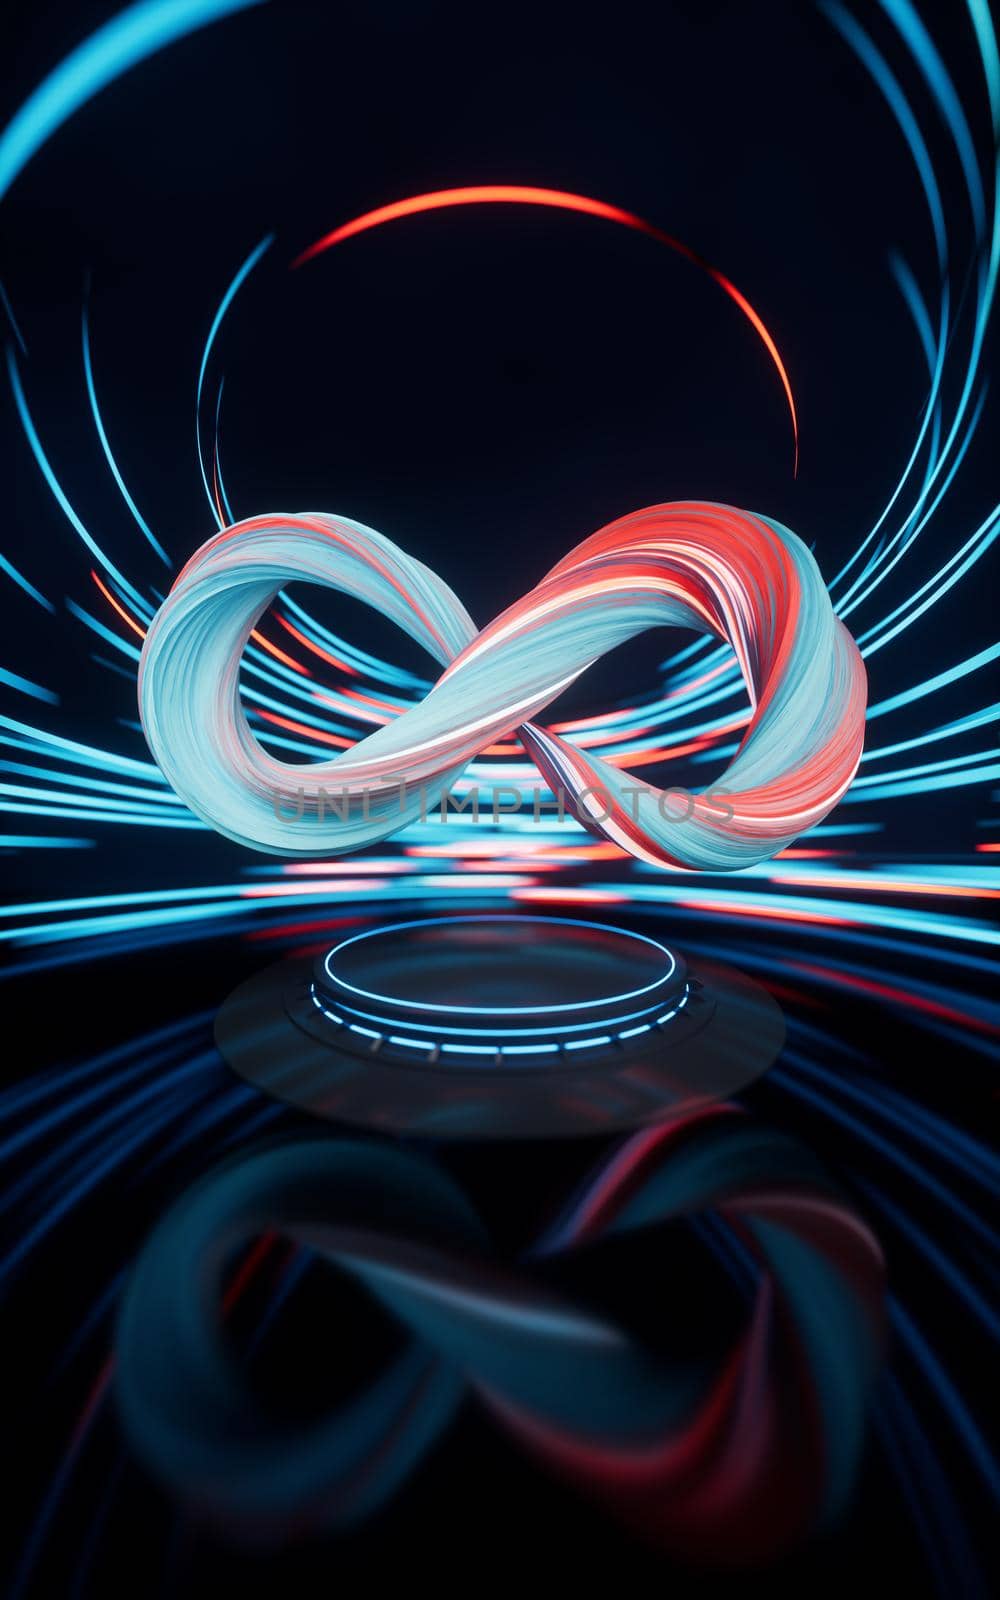 Mobius belt with spin lines effect background, 3d rendering. Computer digital drawing.